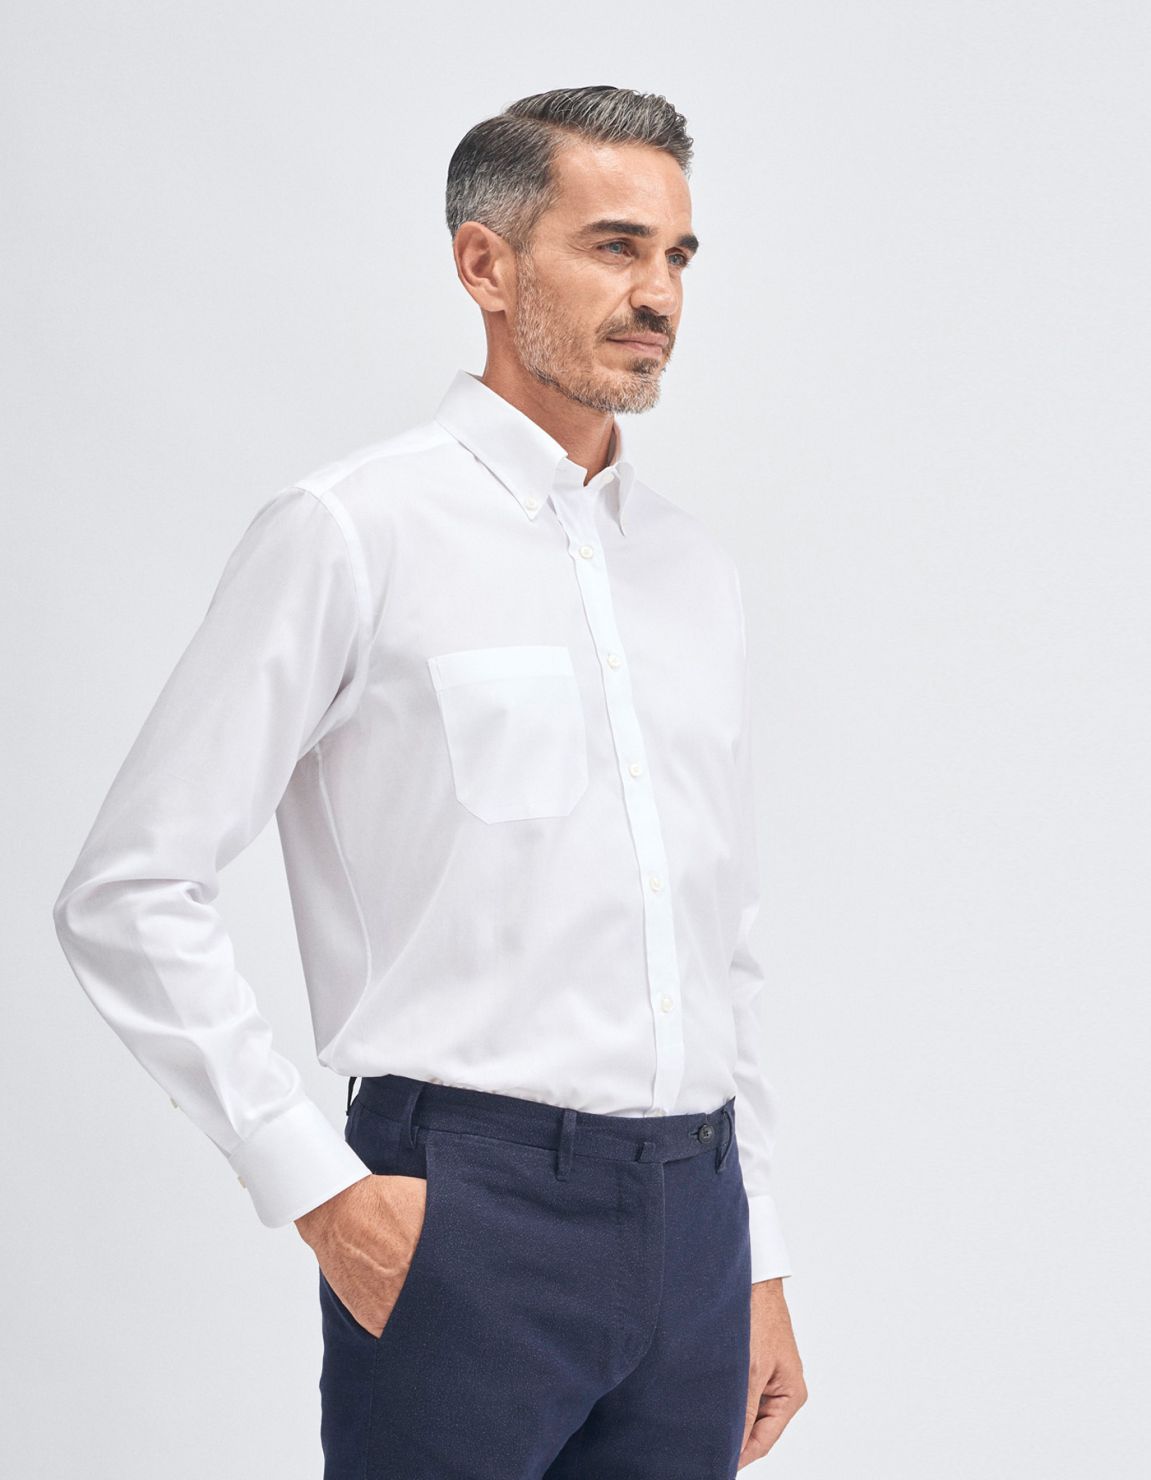 Shirt Collar button down White Pin point Evolution Classic Fit 1